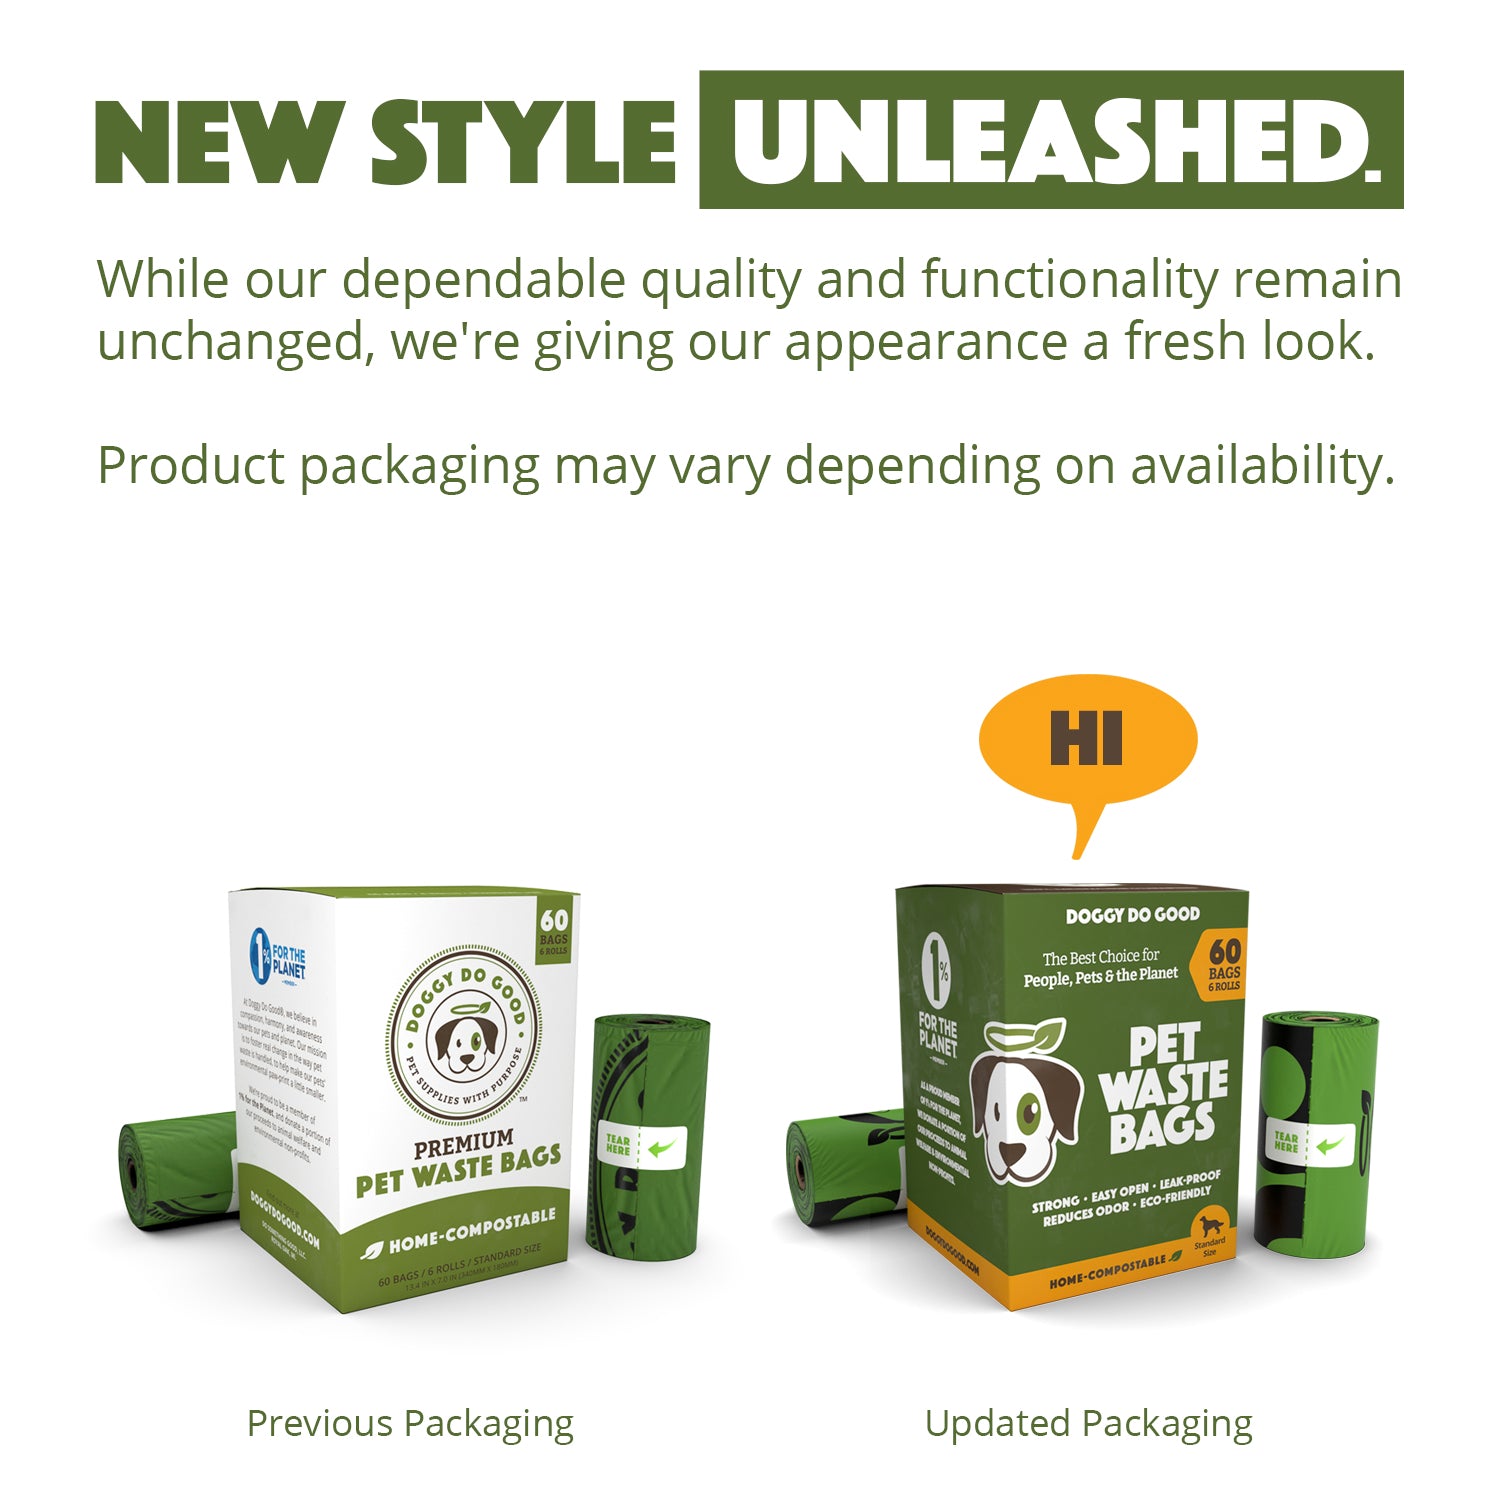 Home Compostable Standard Rolled Bags (60 Bags)